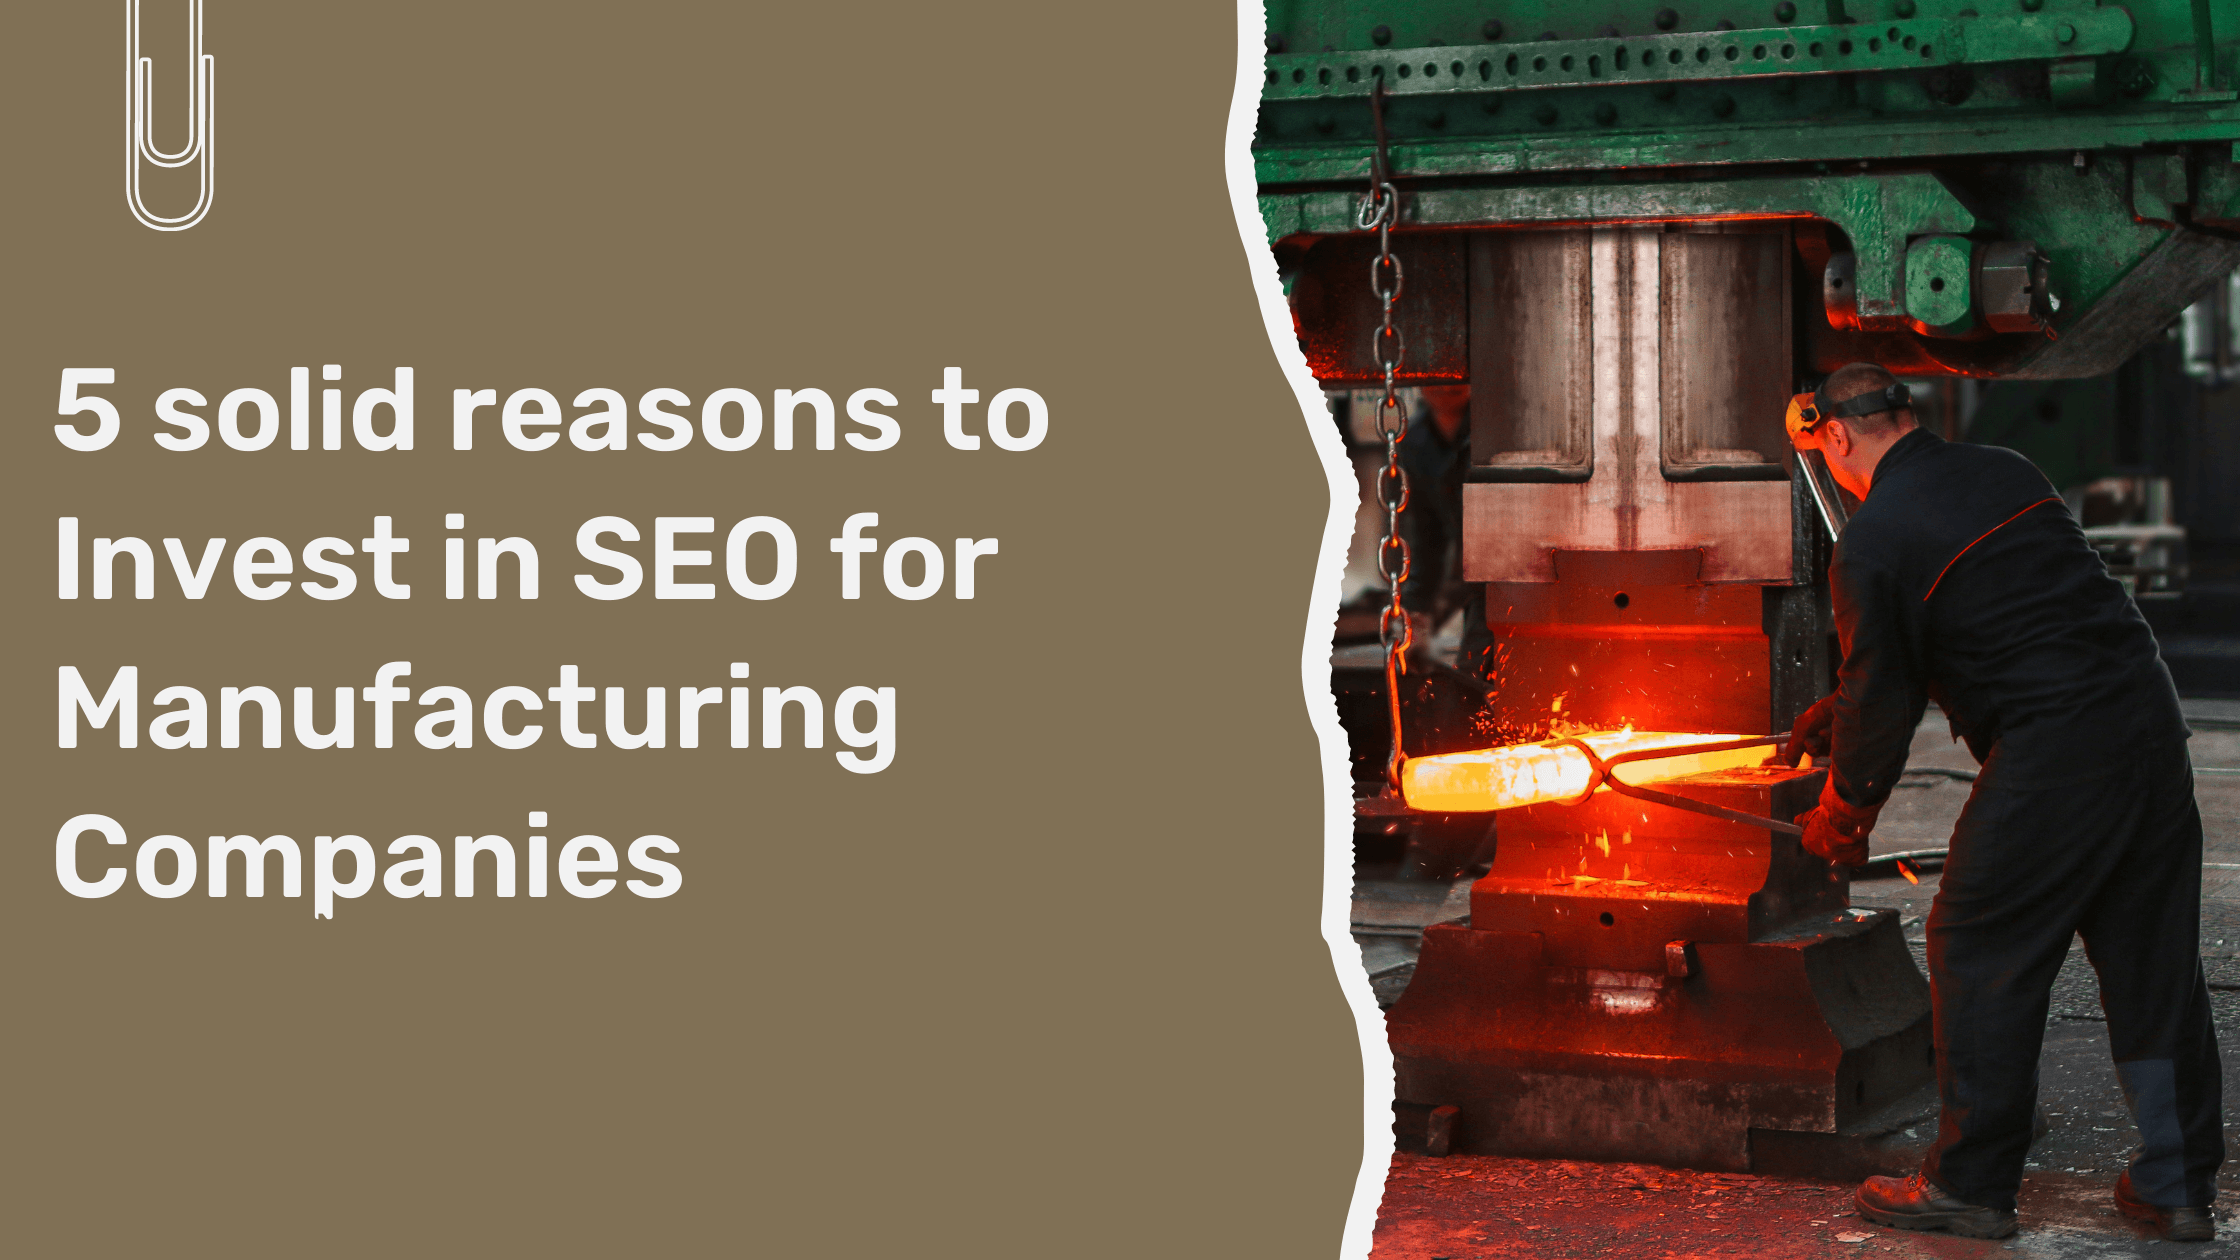 5 solid reasons to invest in SEO for manufacturing companies